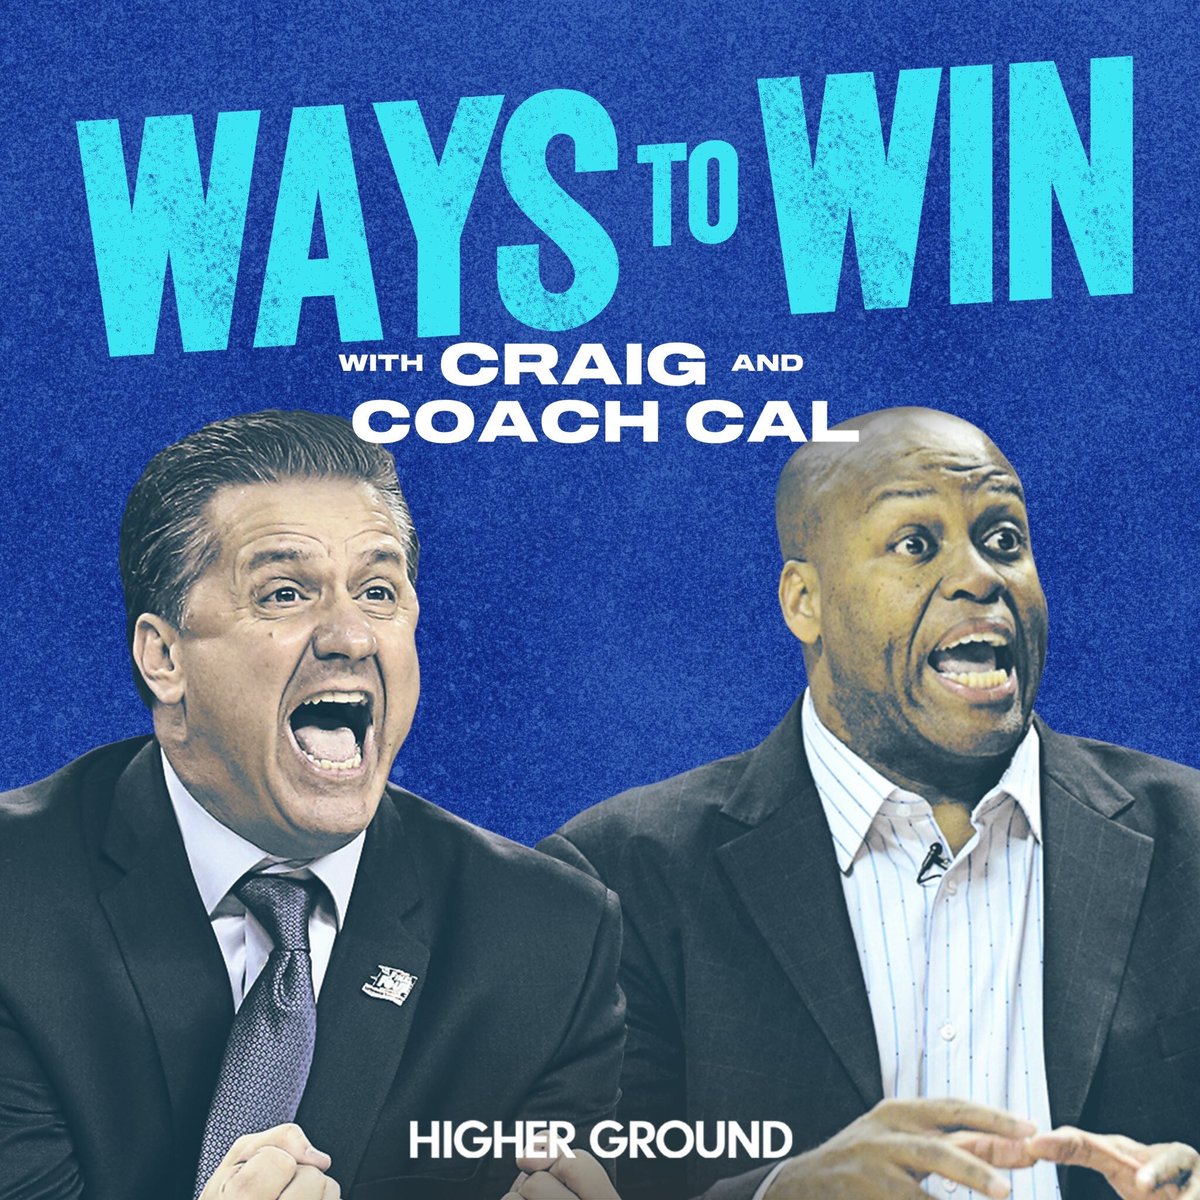 My big brother @CraigMalRob and @UKCoachCalipari just launched their podcast, Ways To Win, and I hope you'll check it out! In the first episode, they chat with Barack about his #MarchMadness picks, leadership in sports, and their enduring love for basketball. Listen now…